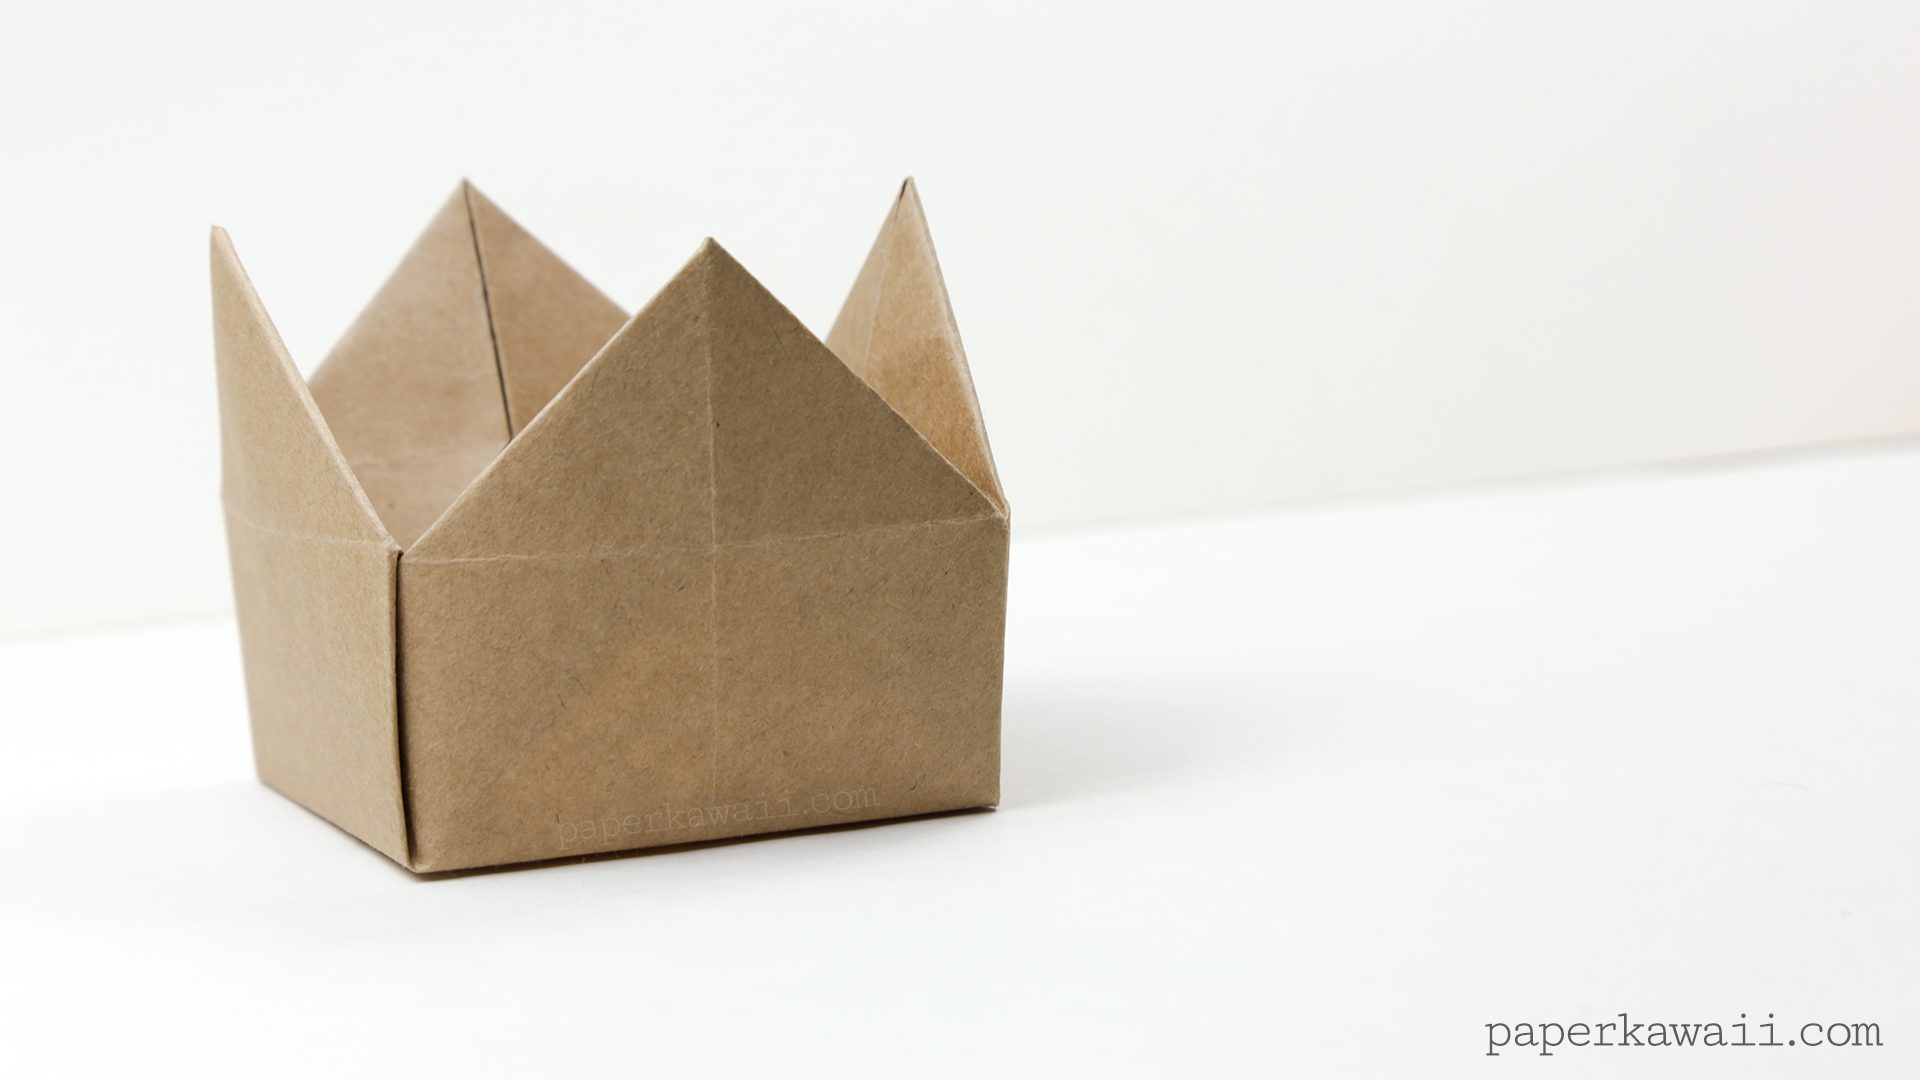 Origami CROWN, Paper crafts